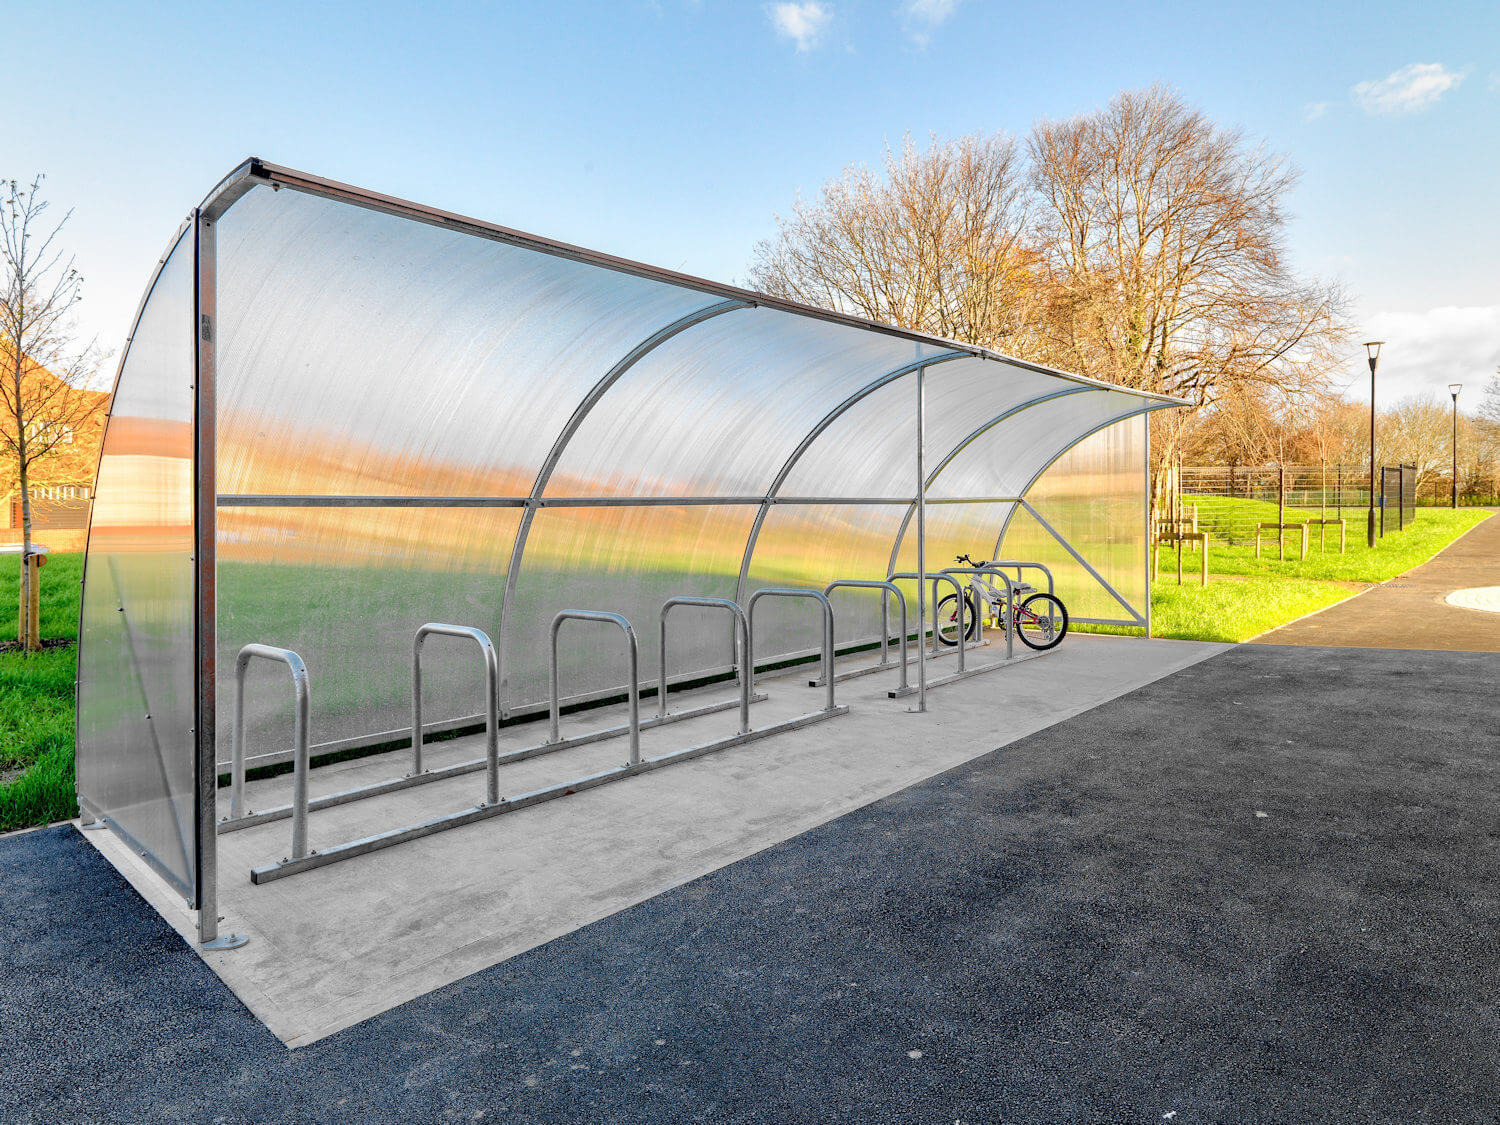 Resources - Velo Cycle Shelter